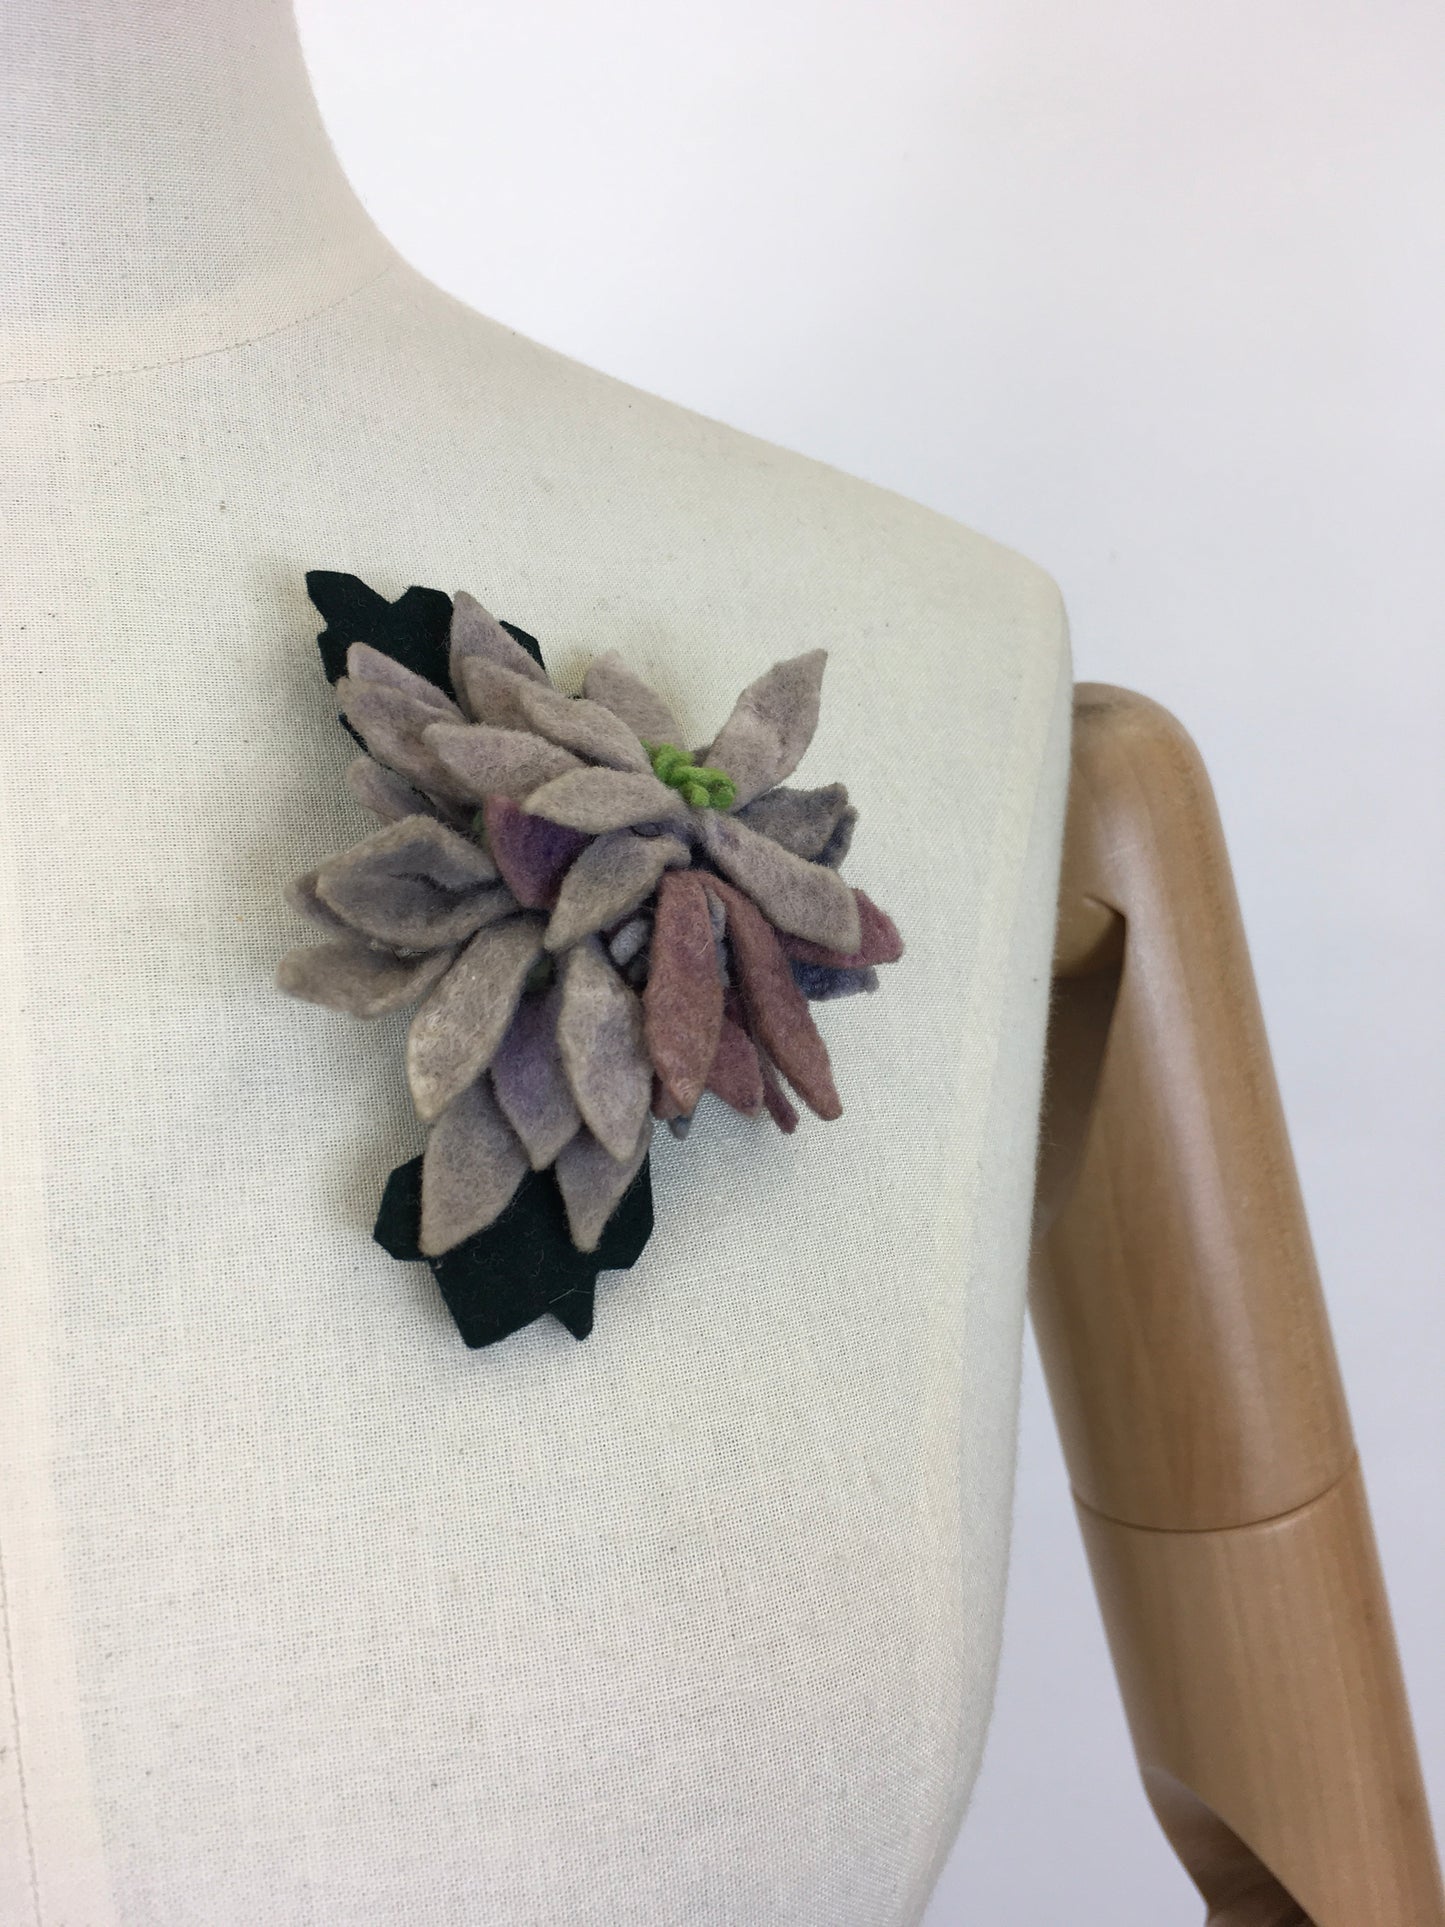 Original 1940’s ‘ Make Do And Mend ‘ Felt Floral Posy Corsage - In Muted Purple, Violets and Greenery